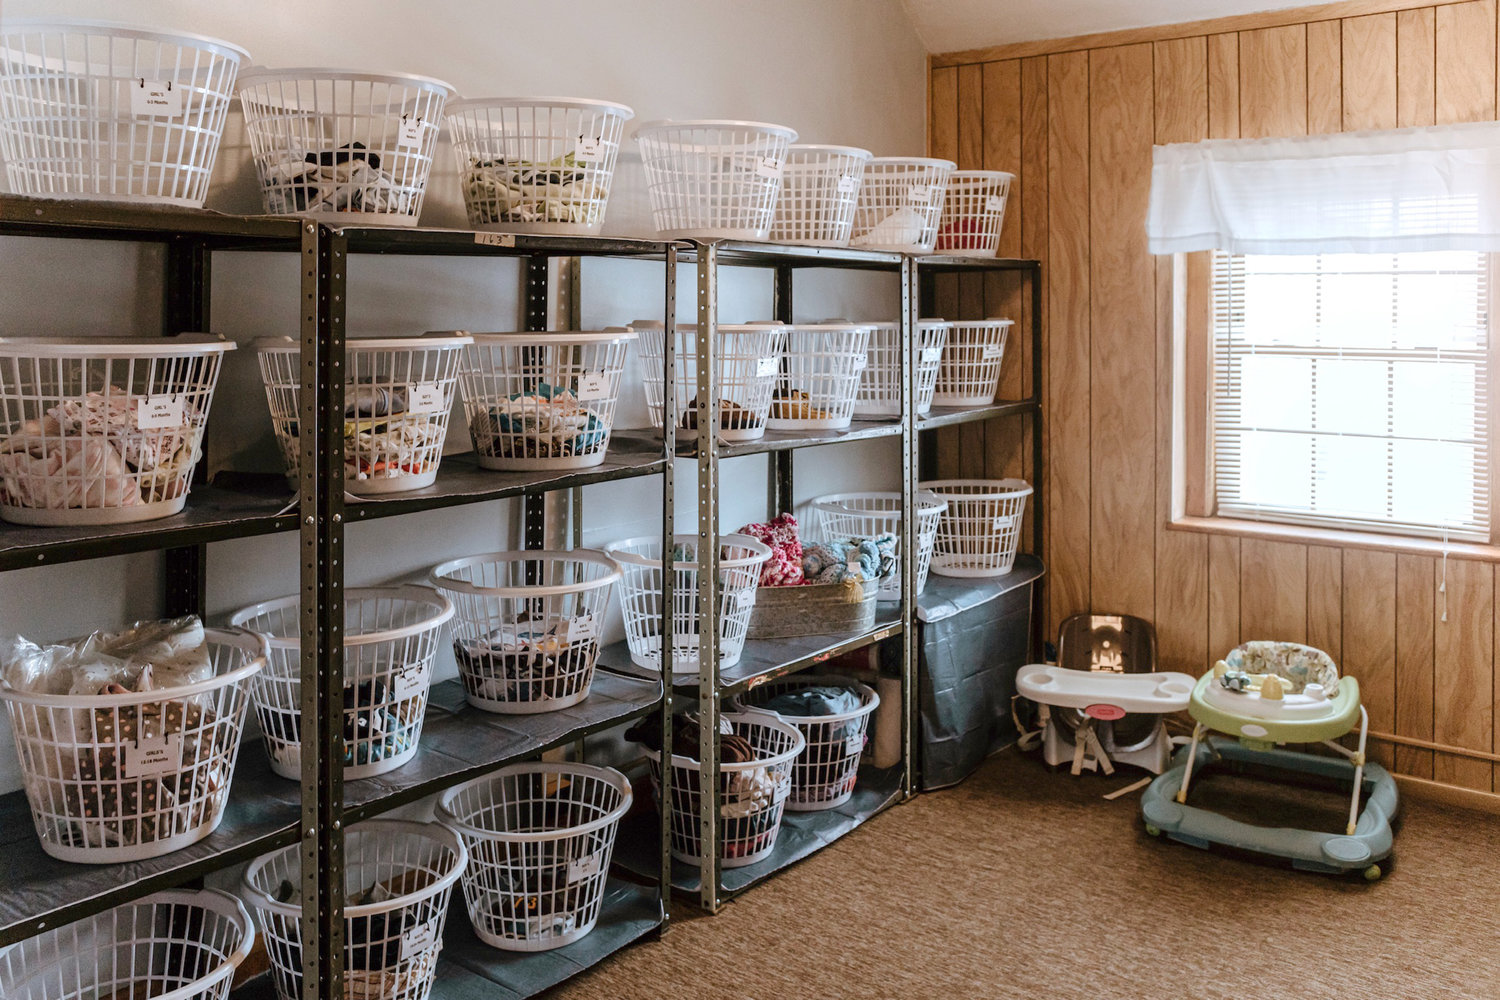 SUPPLIES — Baskets of supplies are stored in one of the offices at the new Care Net Pregnancy Center of Central New York’s Boonville location. The non-profit organization provides a host of services from pregnancy tests to parenting and life skill classes at its 325 Post St. offices.